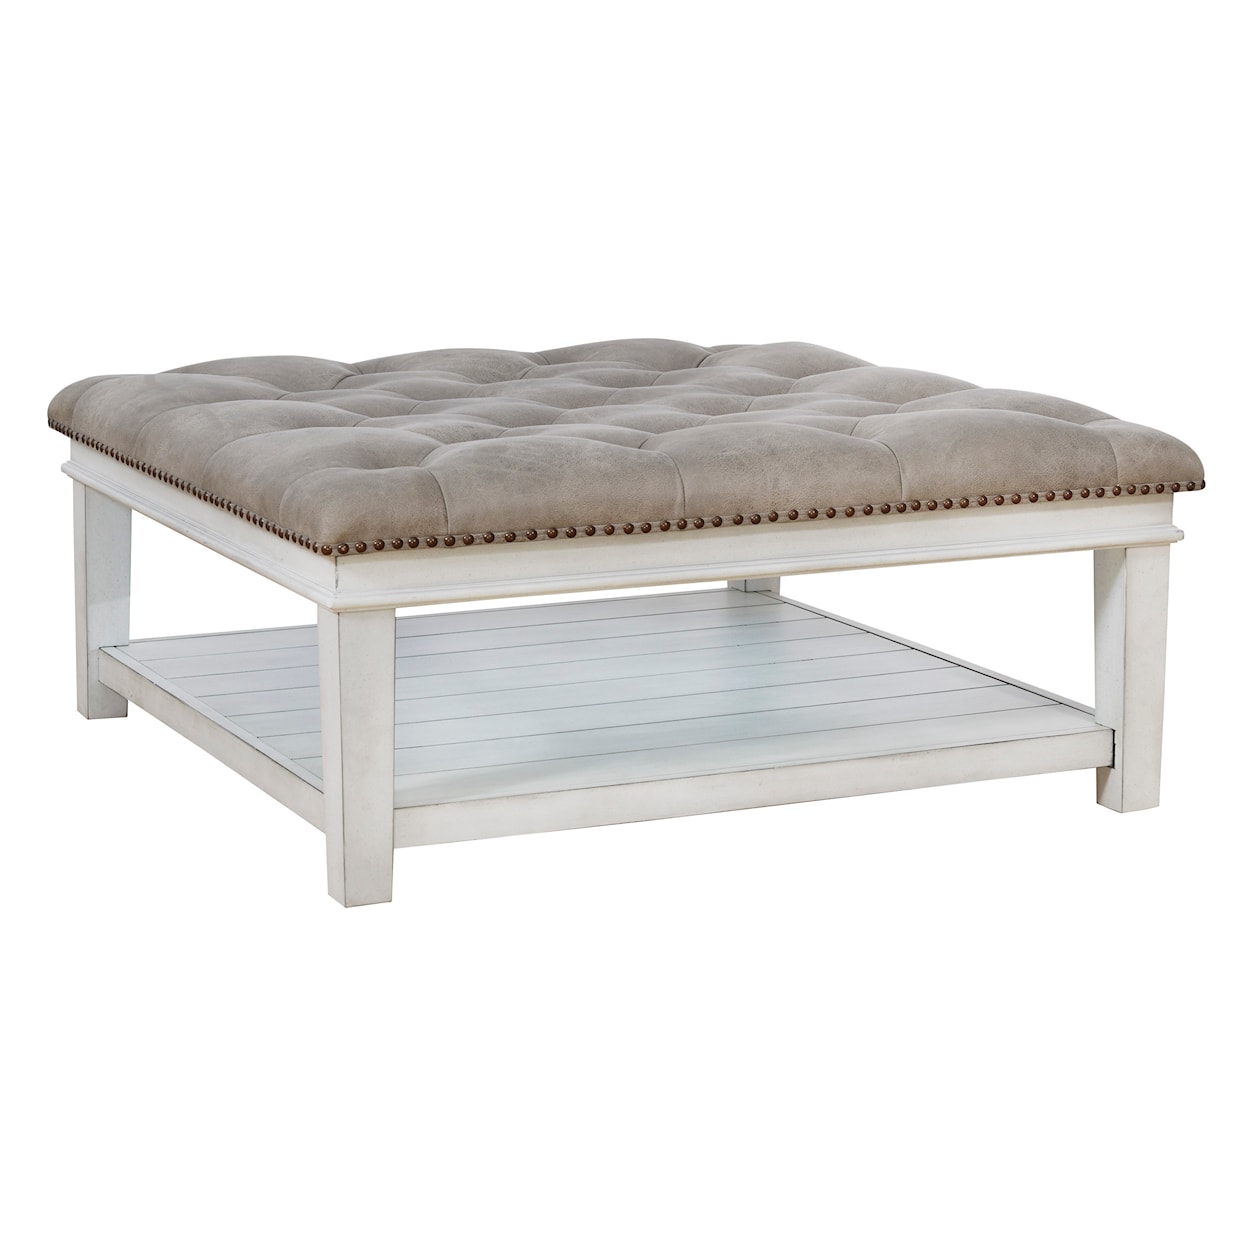 Signature Design by Ashley Furniture Kanwyn Upholstered Ottoman Coffee Table